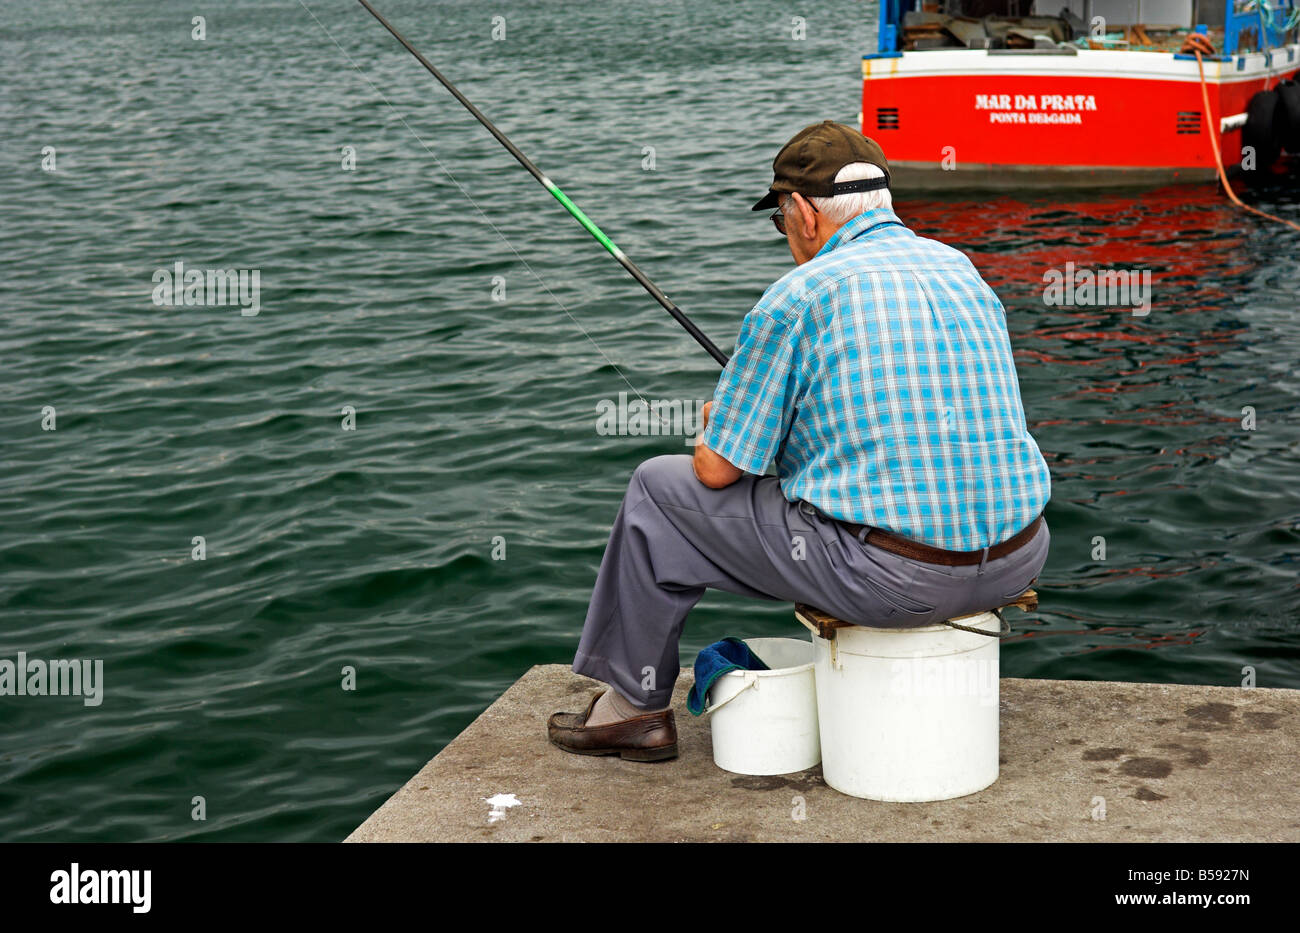 A Guy Fishing at a Floating Dock Editorial Stock Photo - Image of